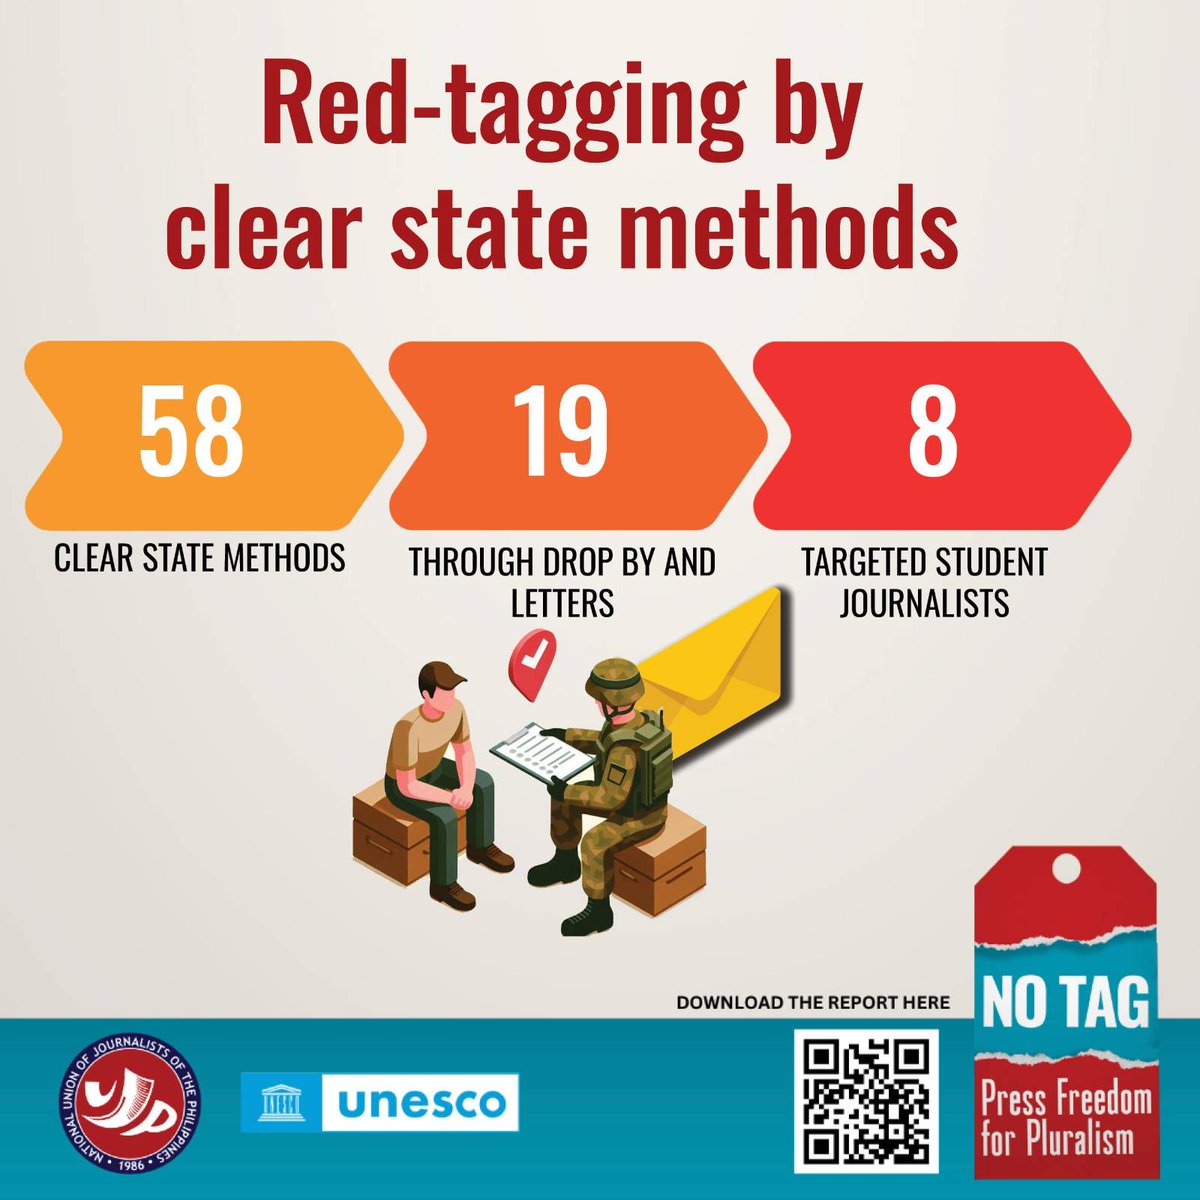 President Ferdinand Marcos Jr. claimed that red-tagging does not come from the government. #StopRedTagging